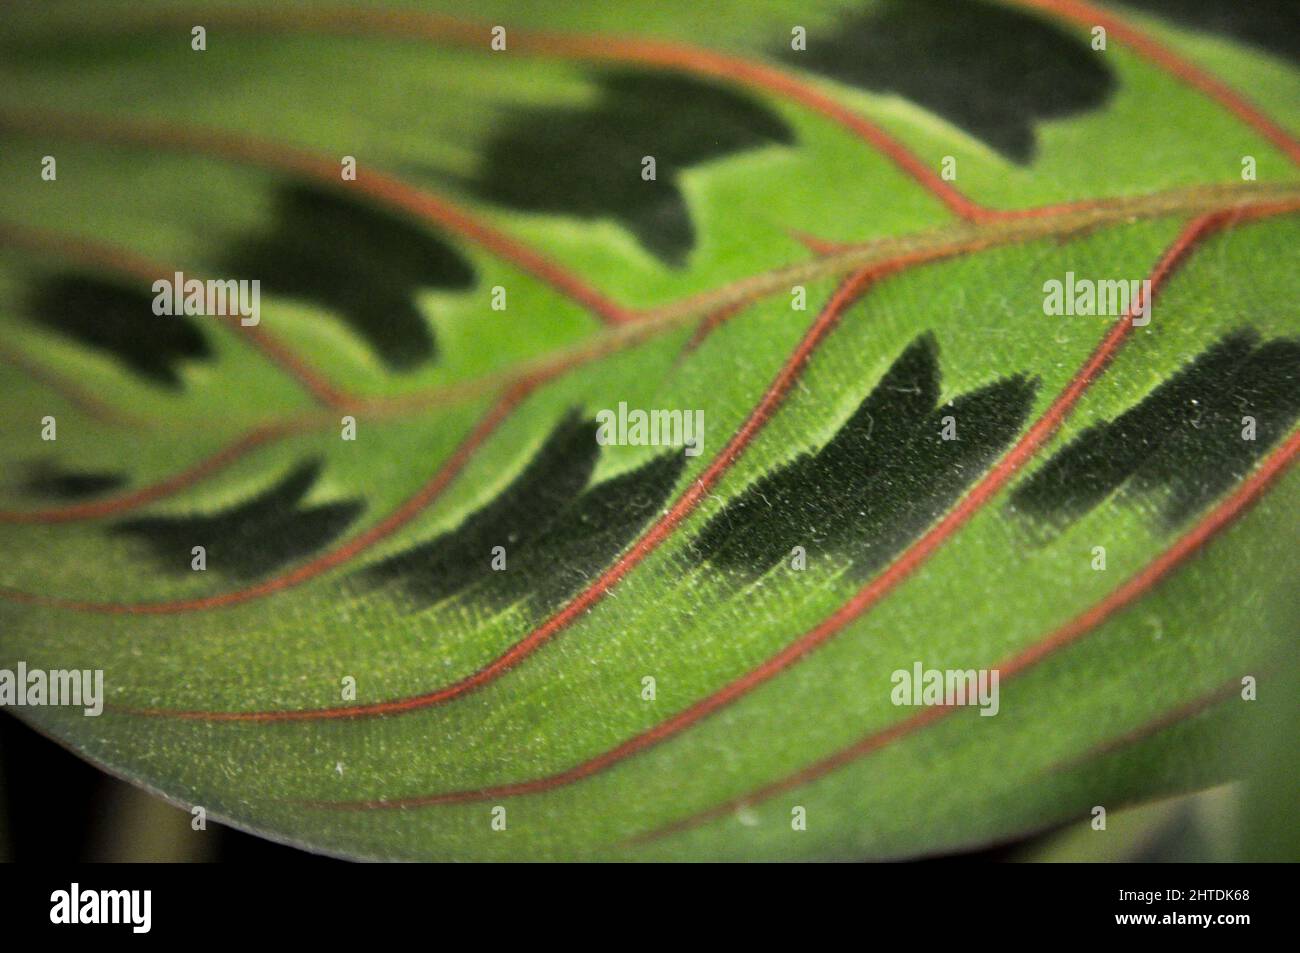 A single leaf from the prayer plant (Red Maranta Calathea) showing the leaf pattern and striking and red veins Stock Photo